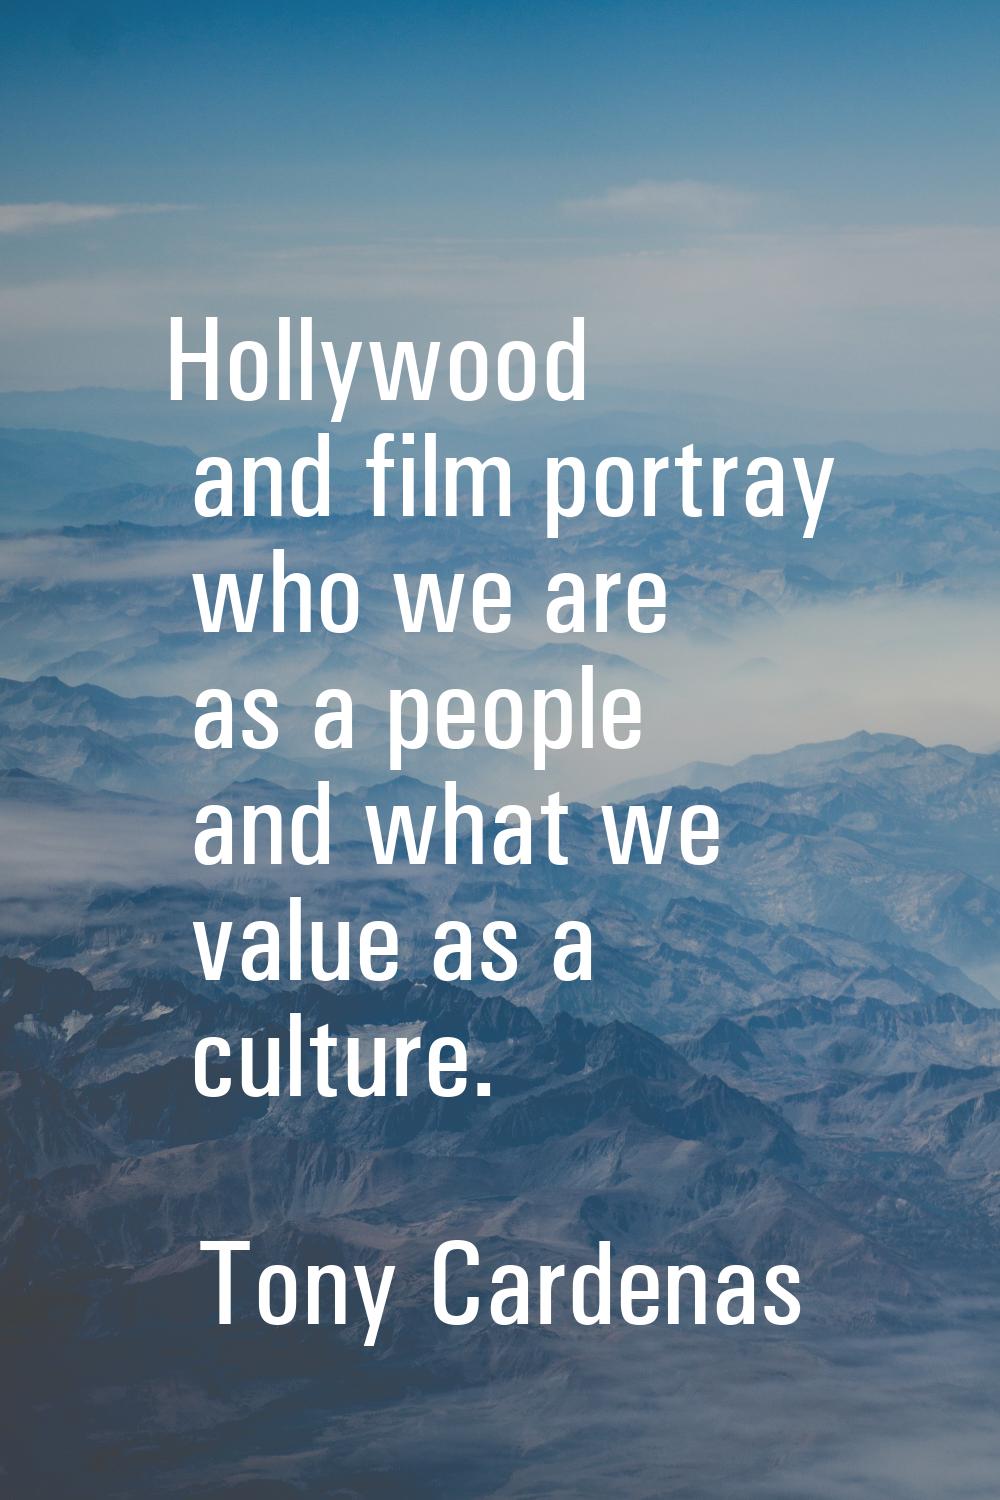 Hollywood and film portray who we are as a people and what we value as a culture.